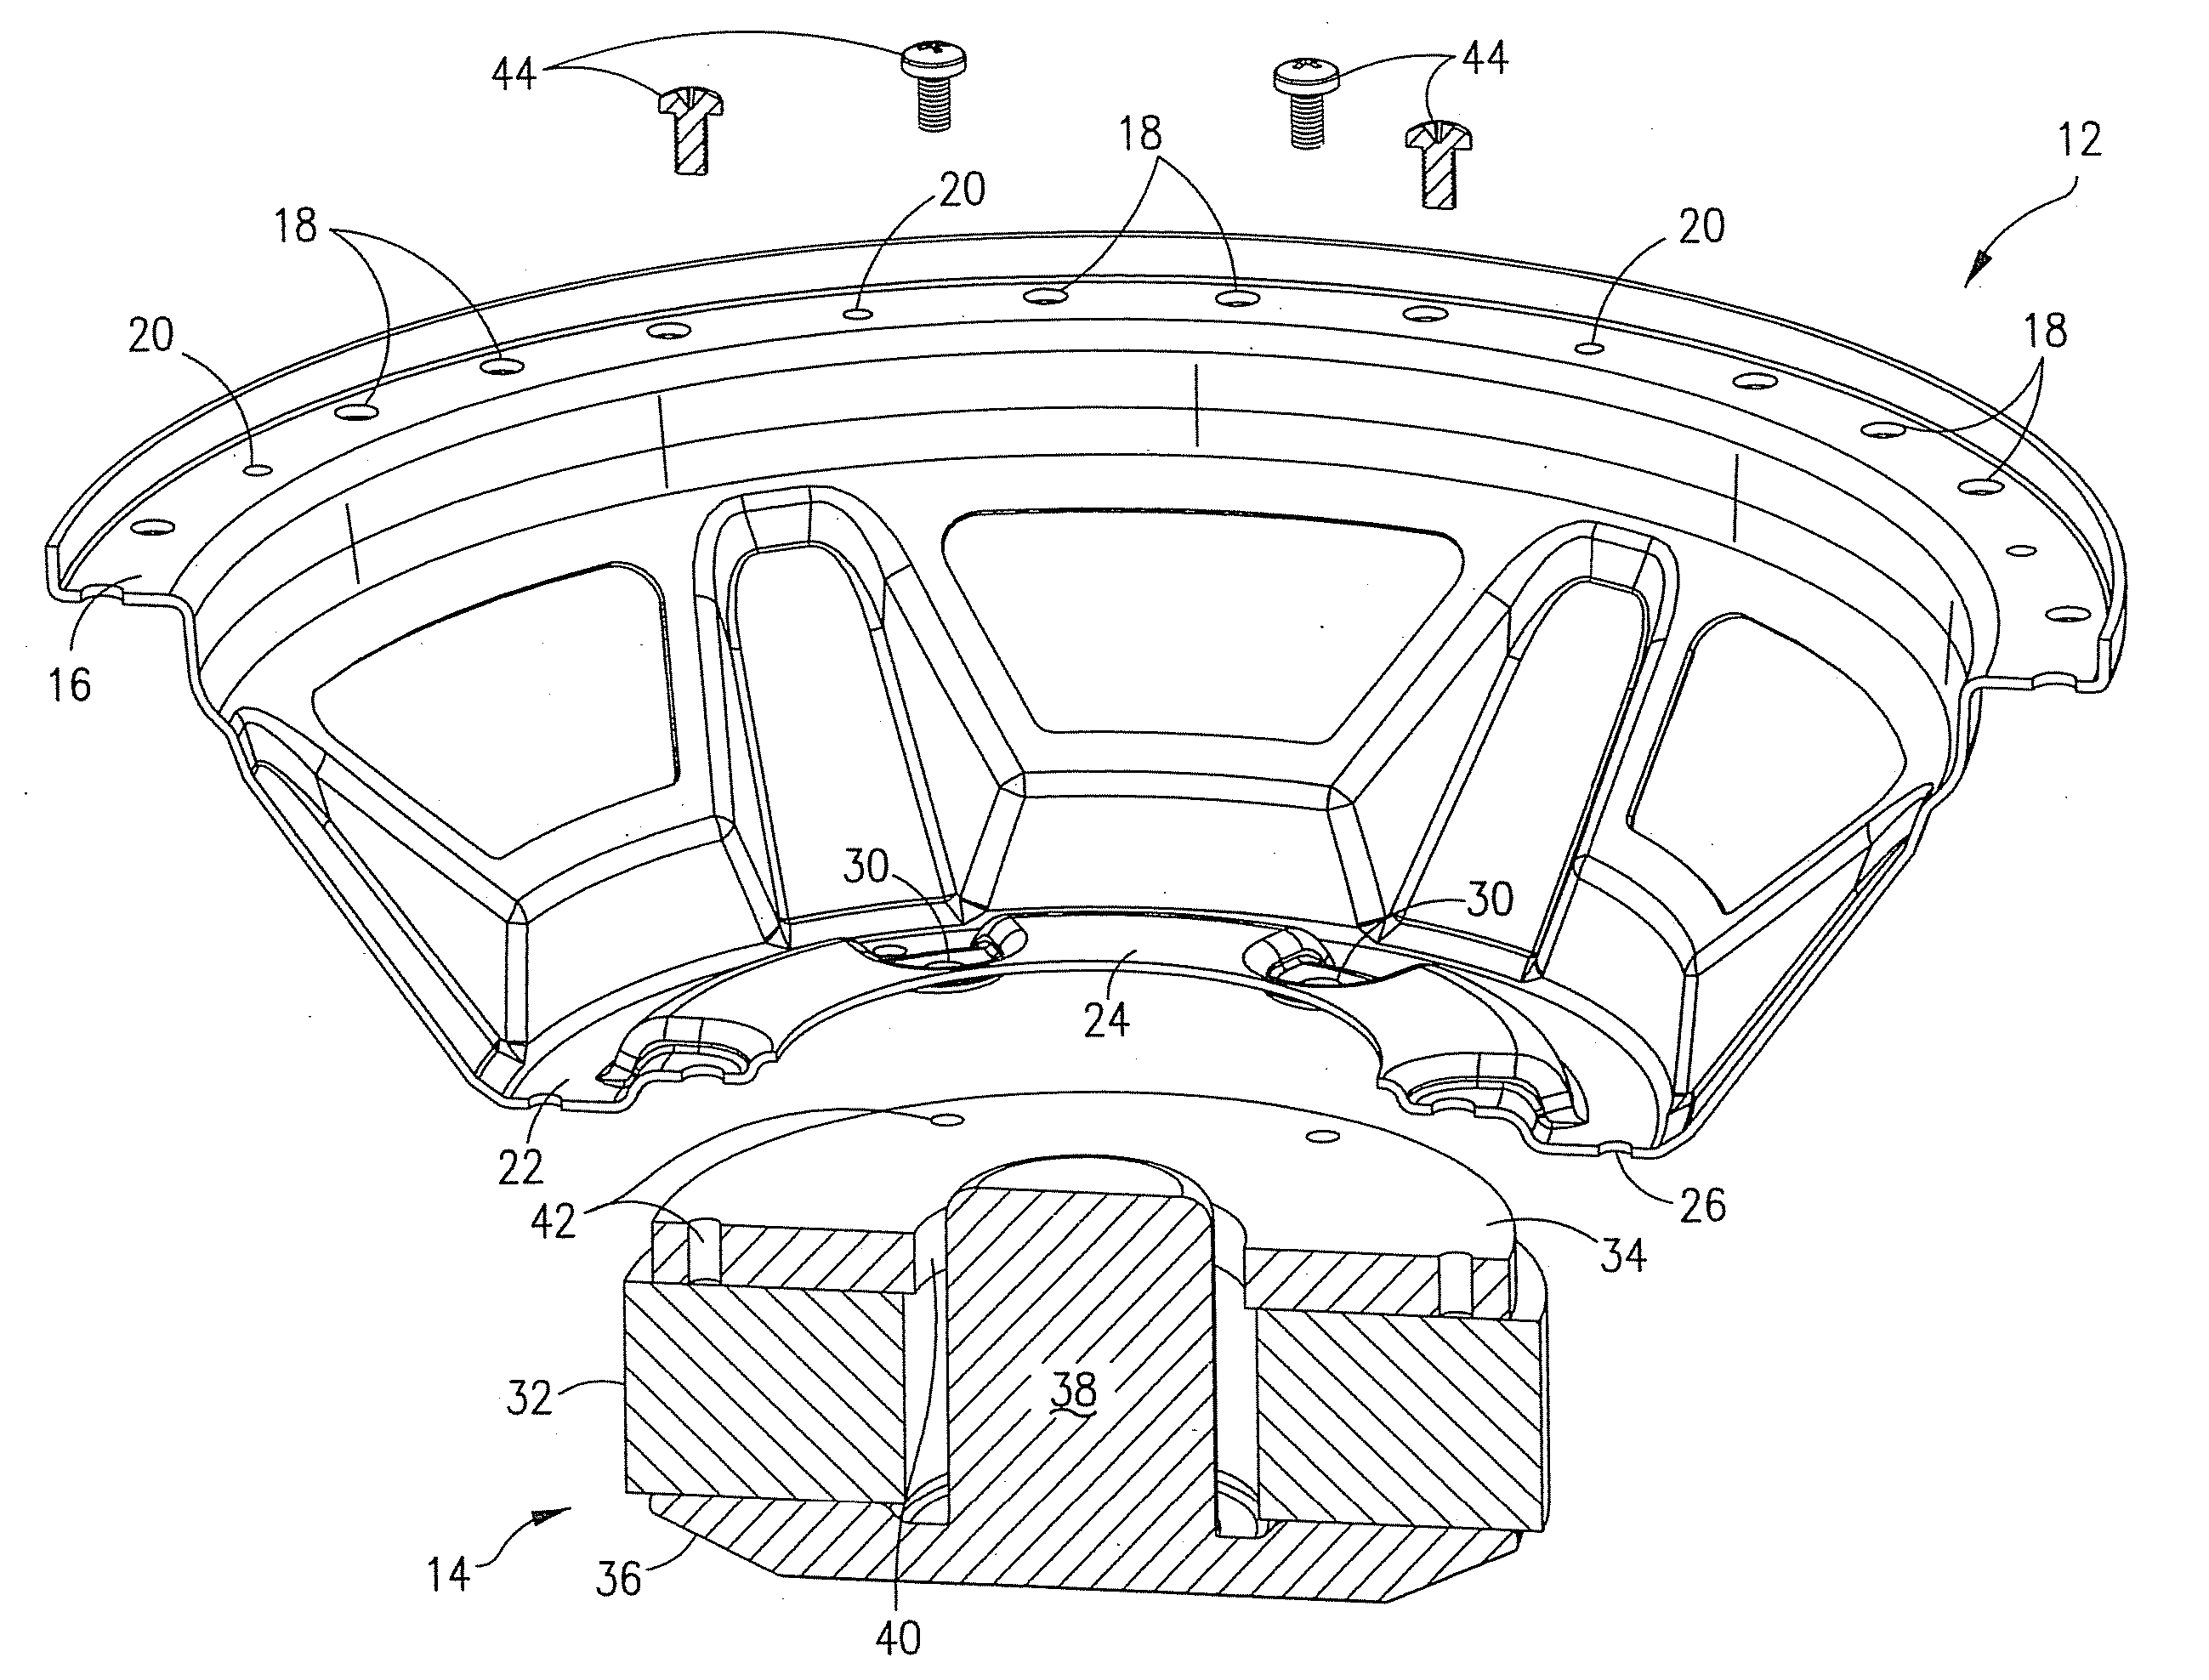 Loudspeaker with field replaceable parts and method of assembly